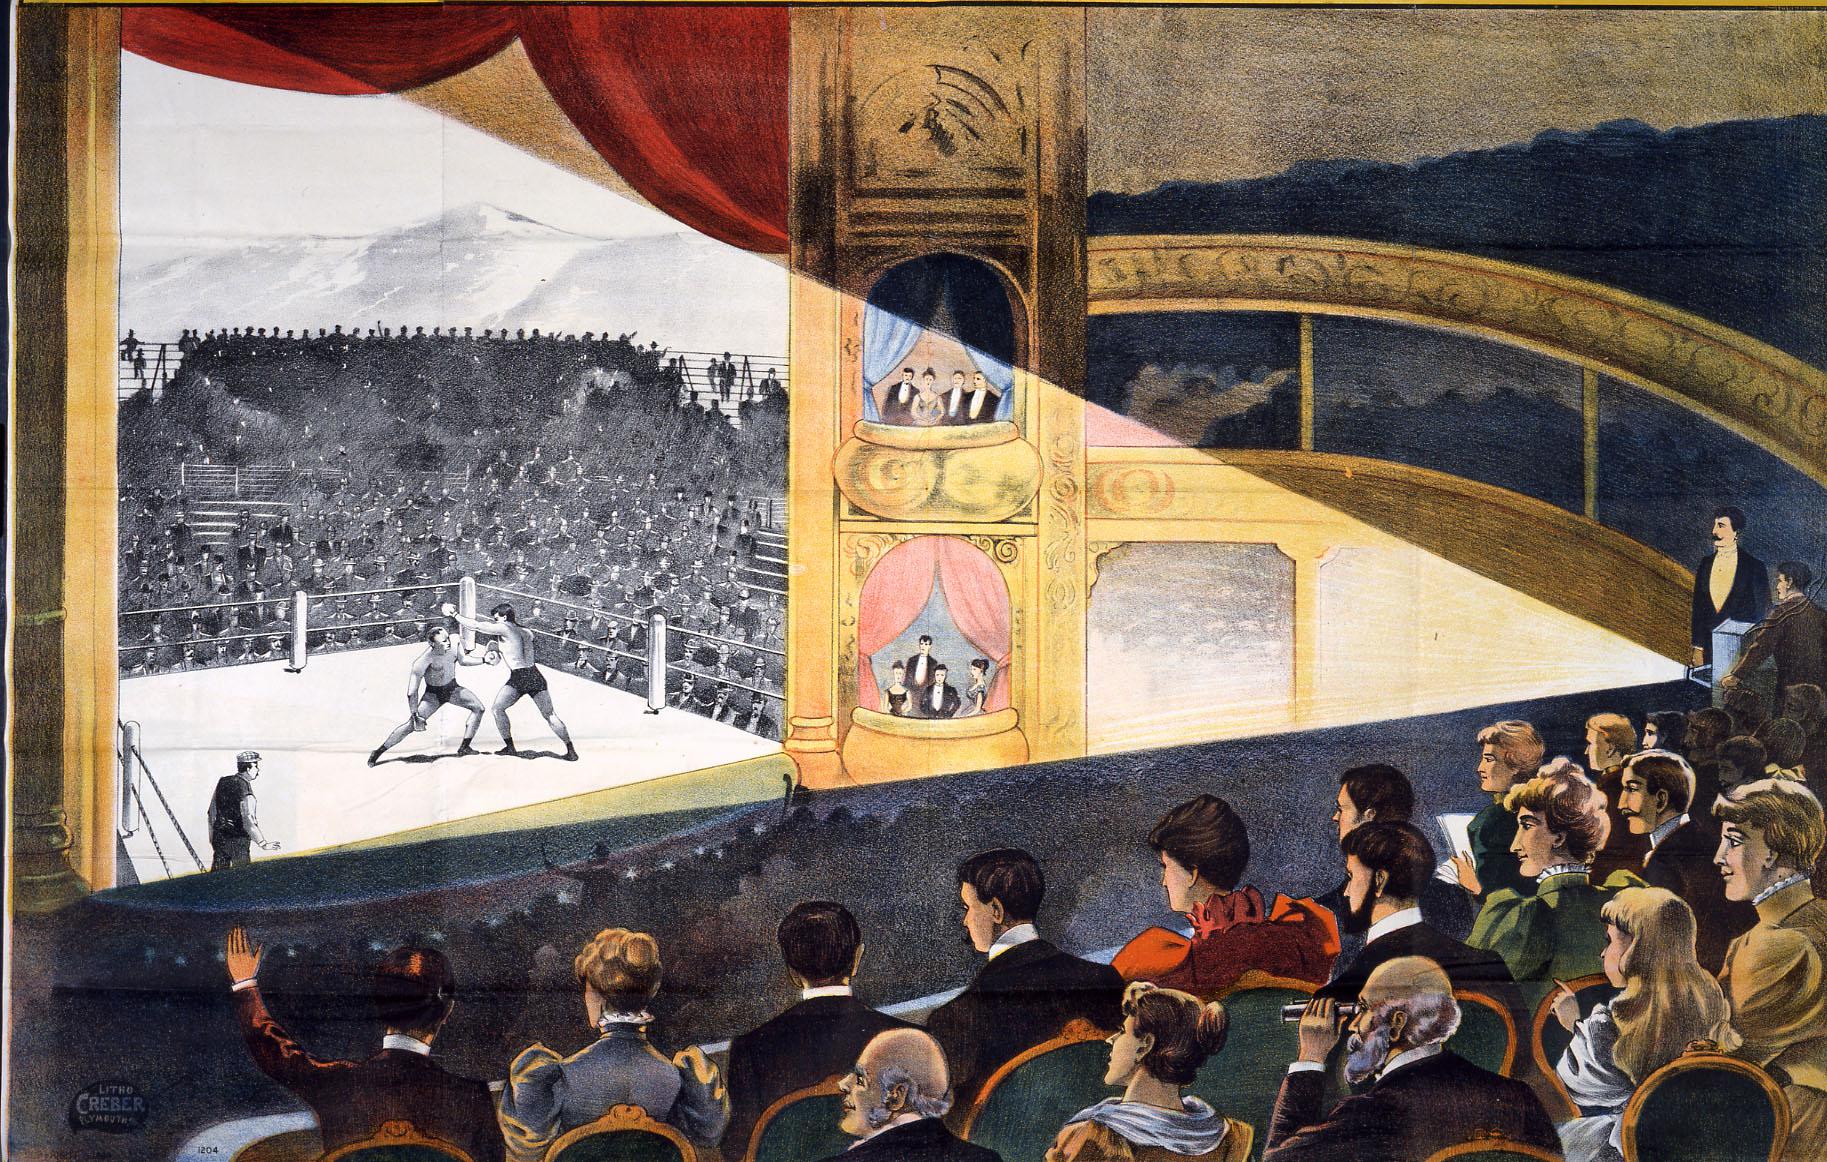 COPY 1/149 (267) - Cinema projection of a boxing match (1899)